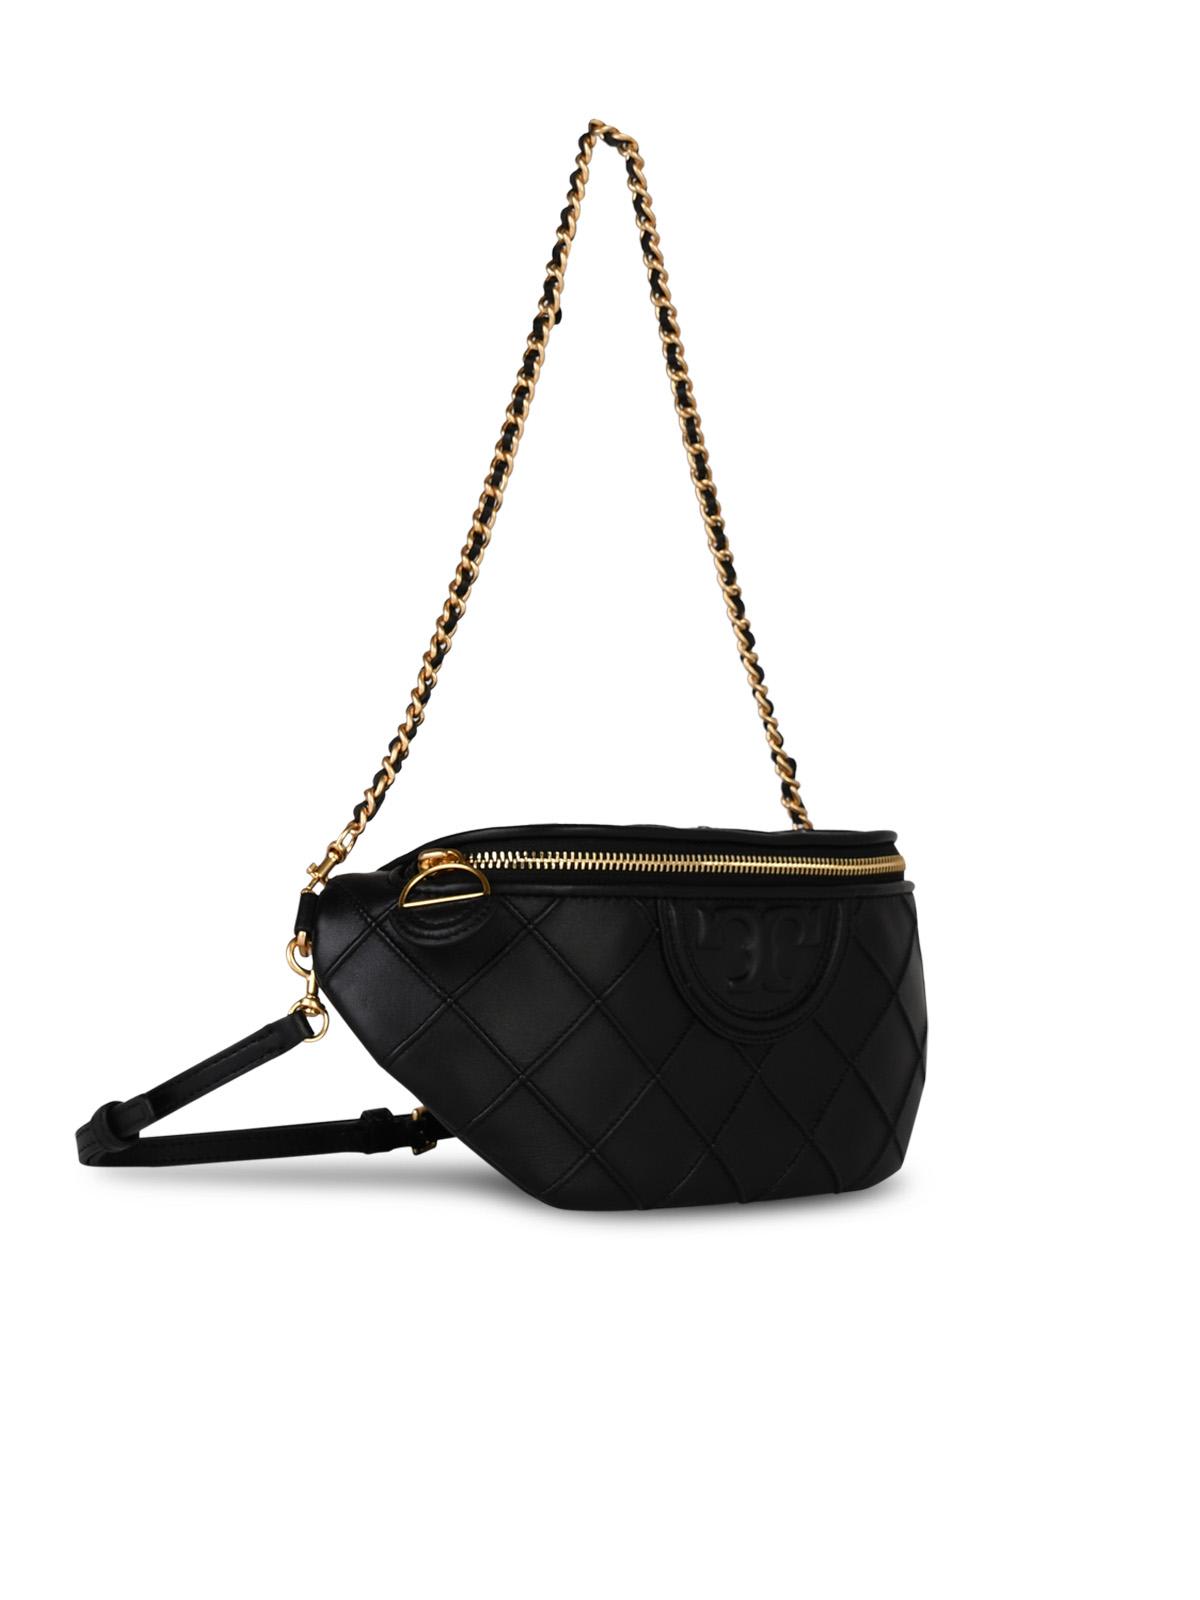 Tory Burch Fleming Black Leather Fanny Pack